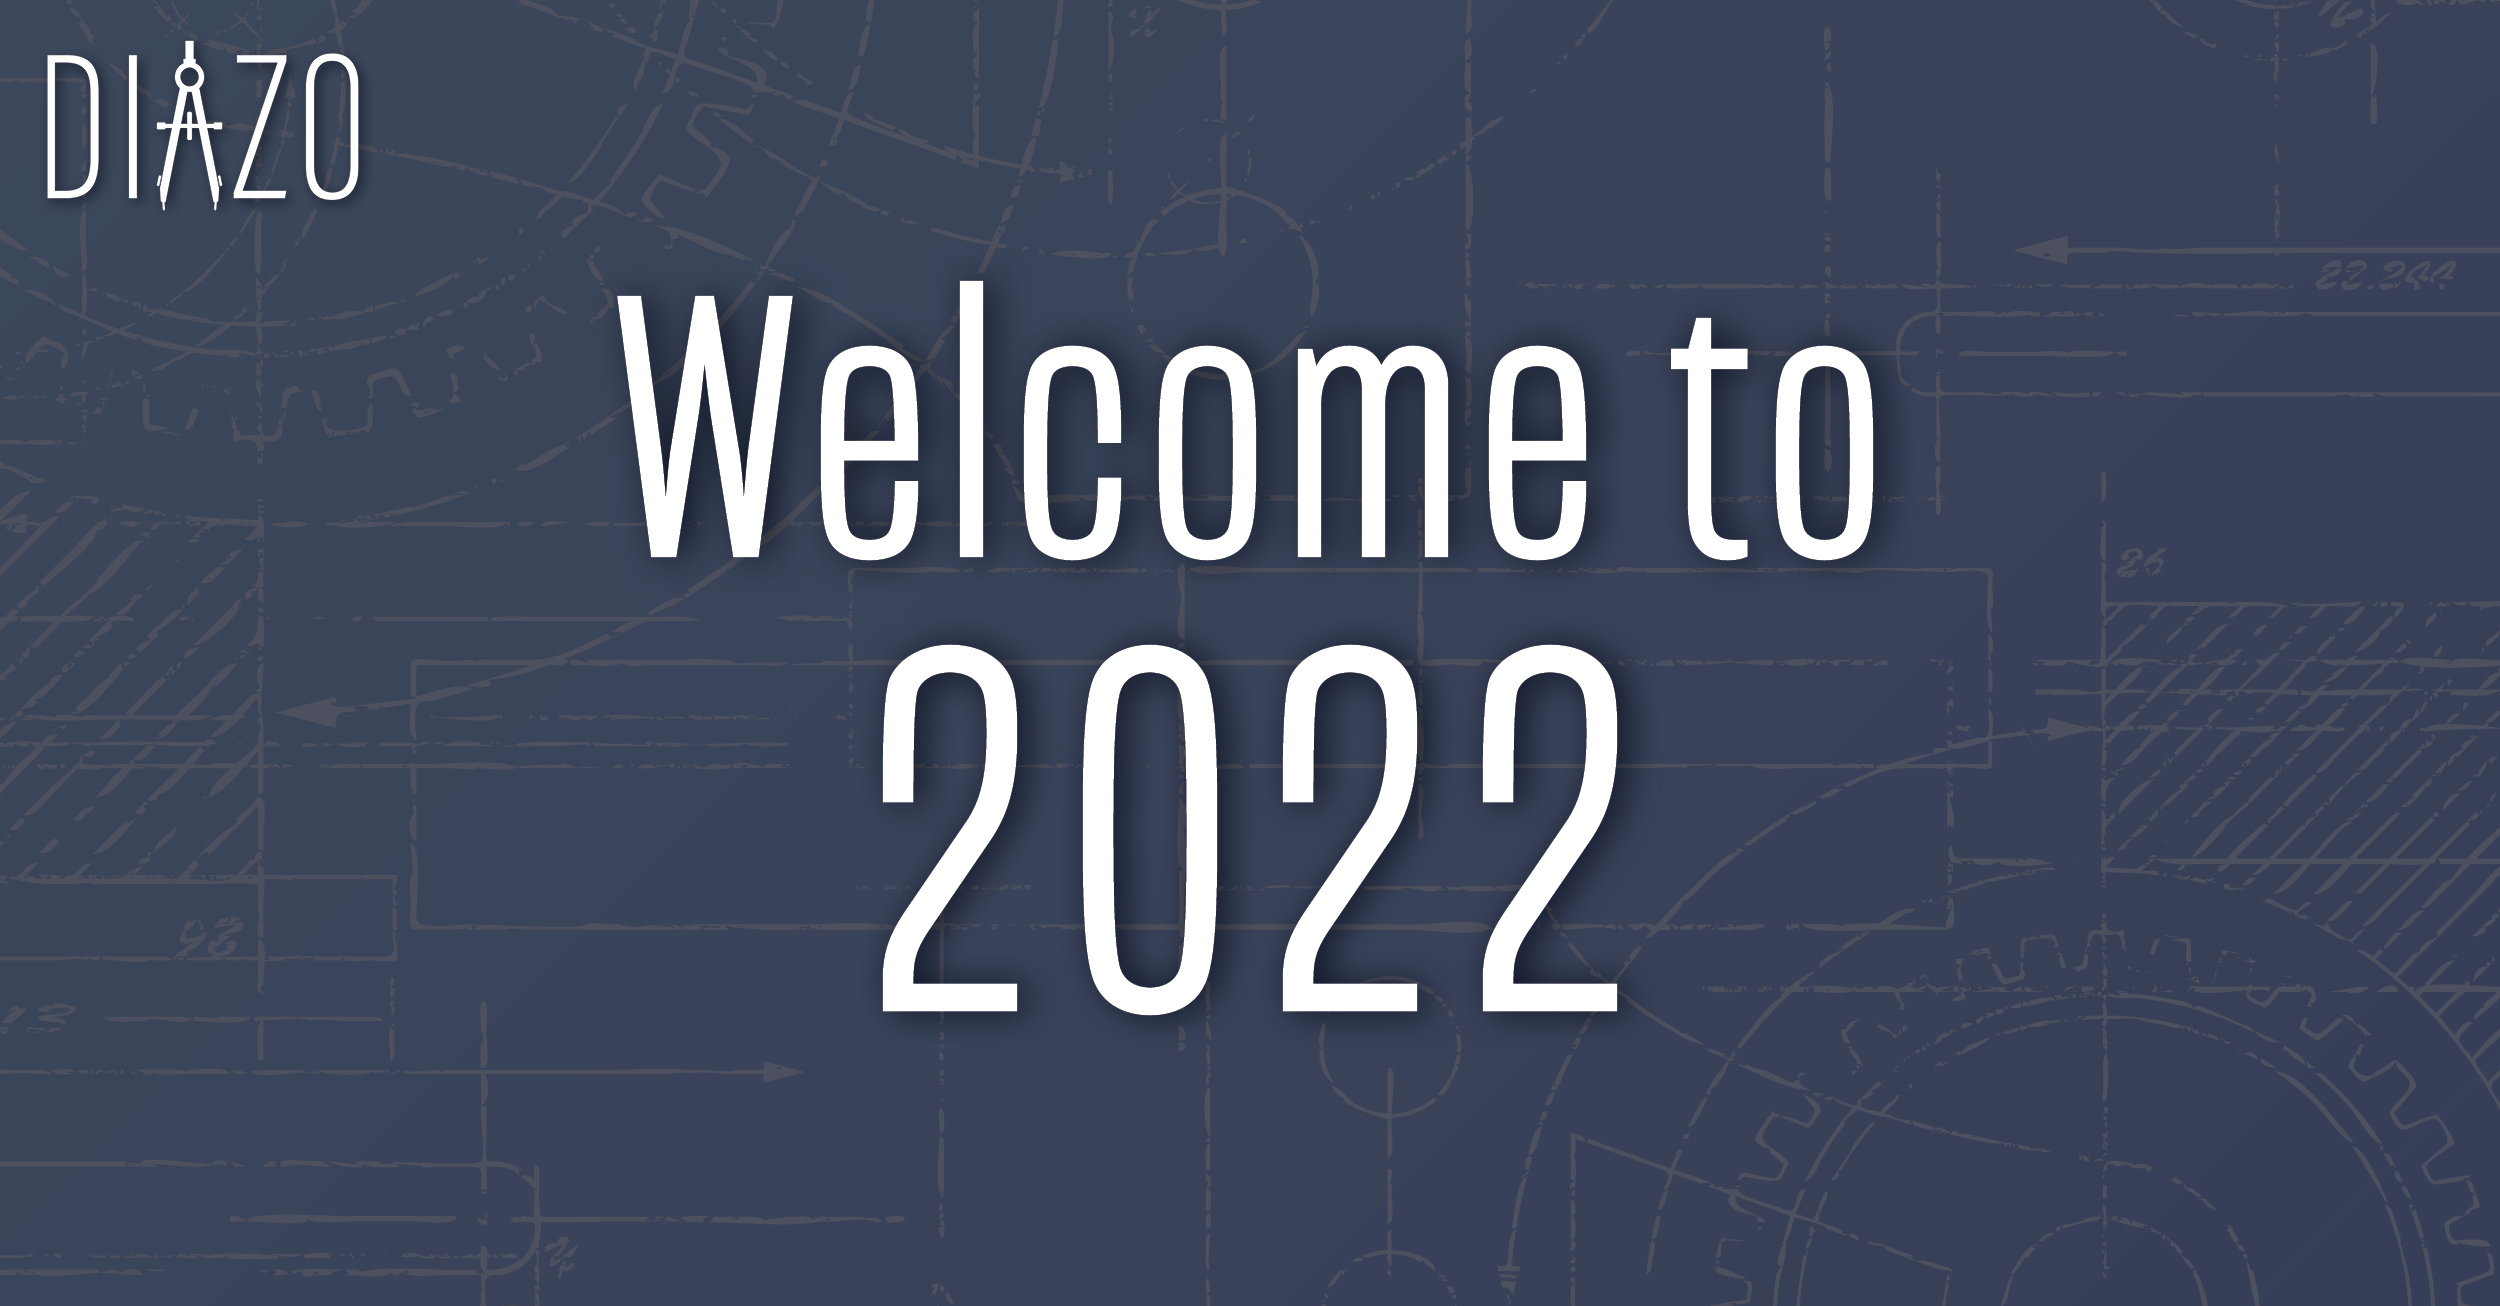 Diazo | Welcome to 2022